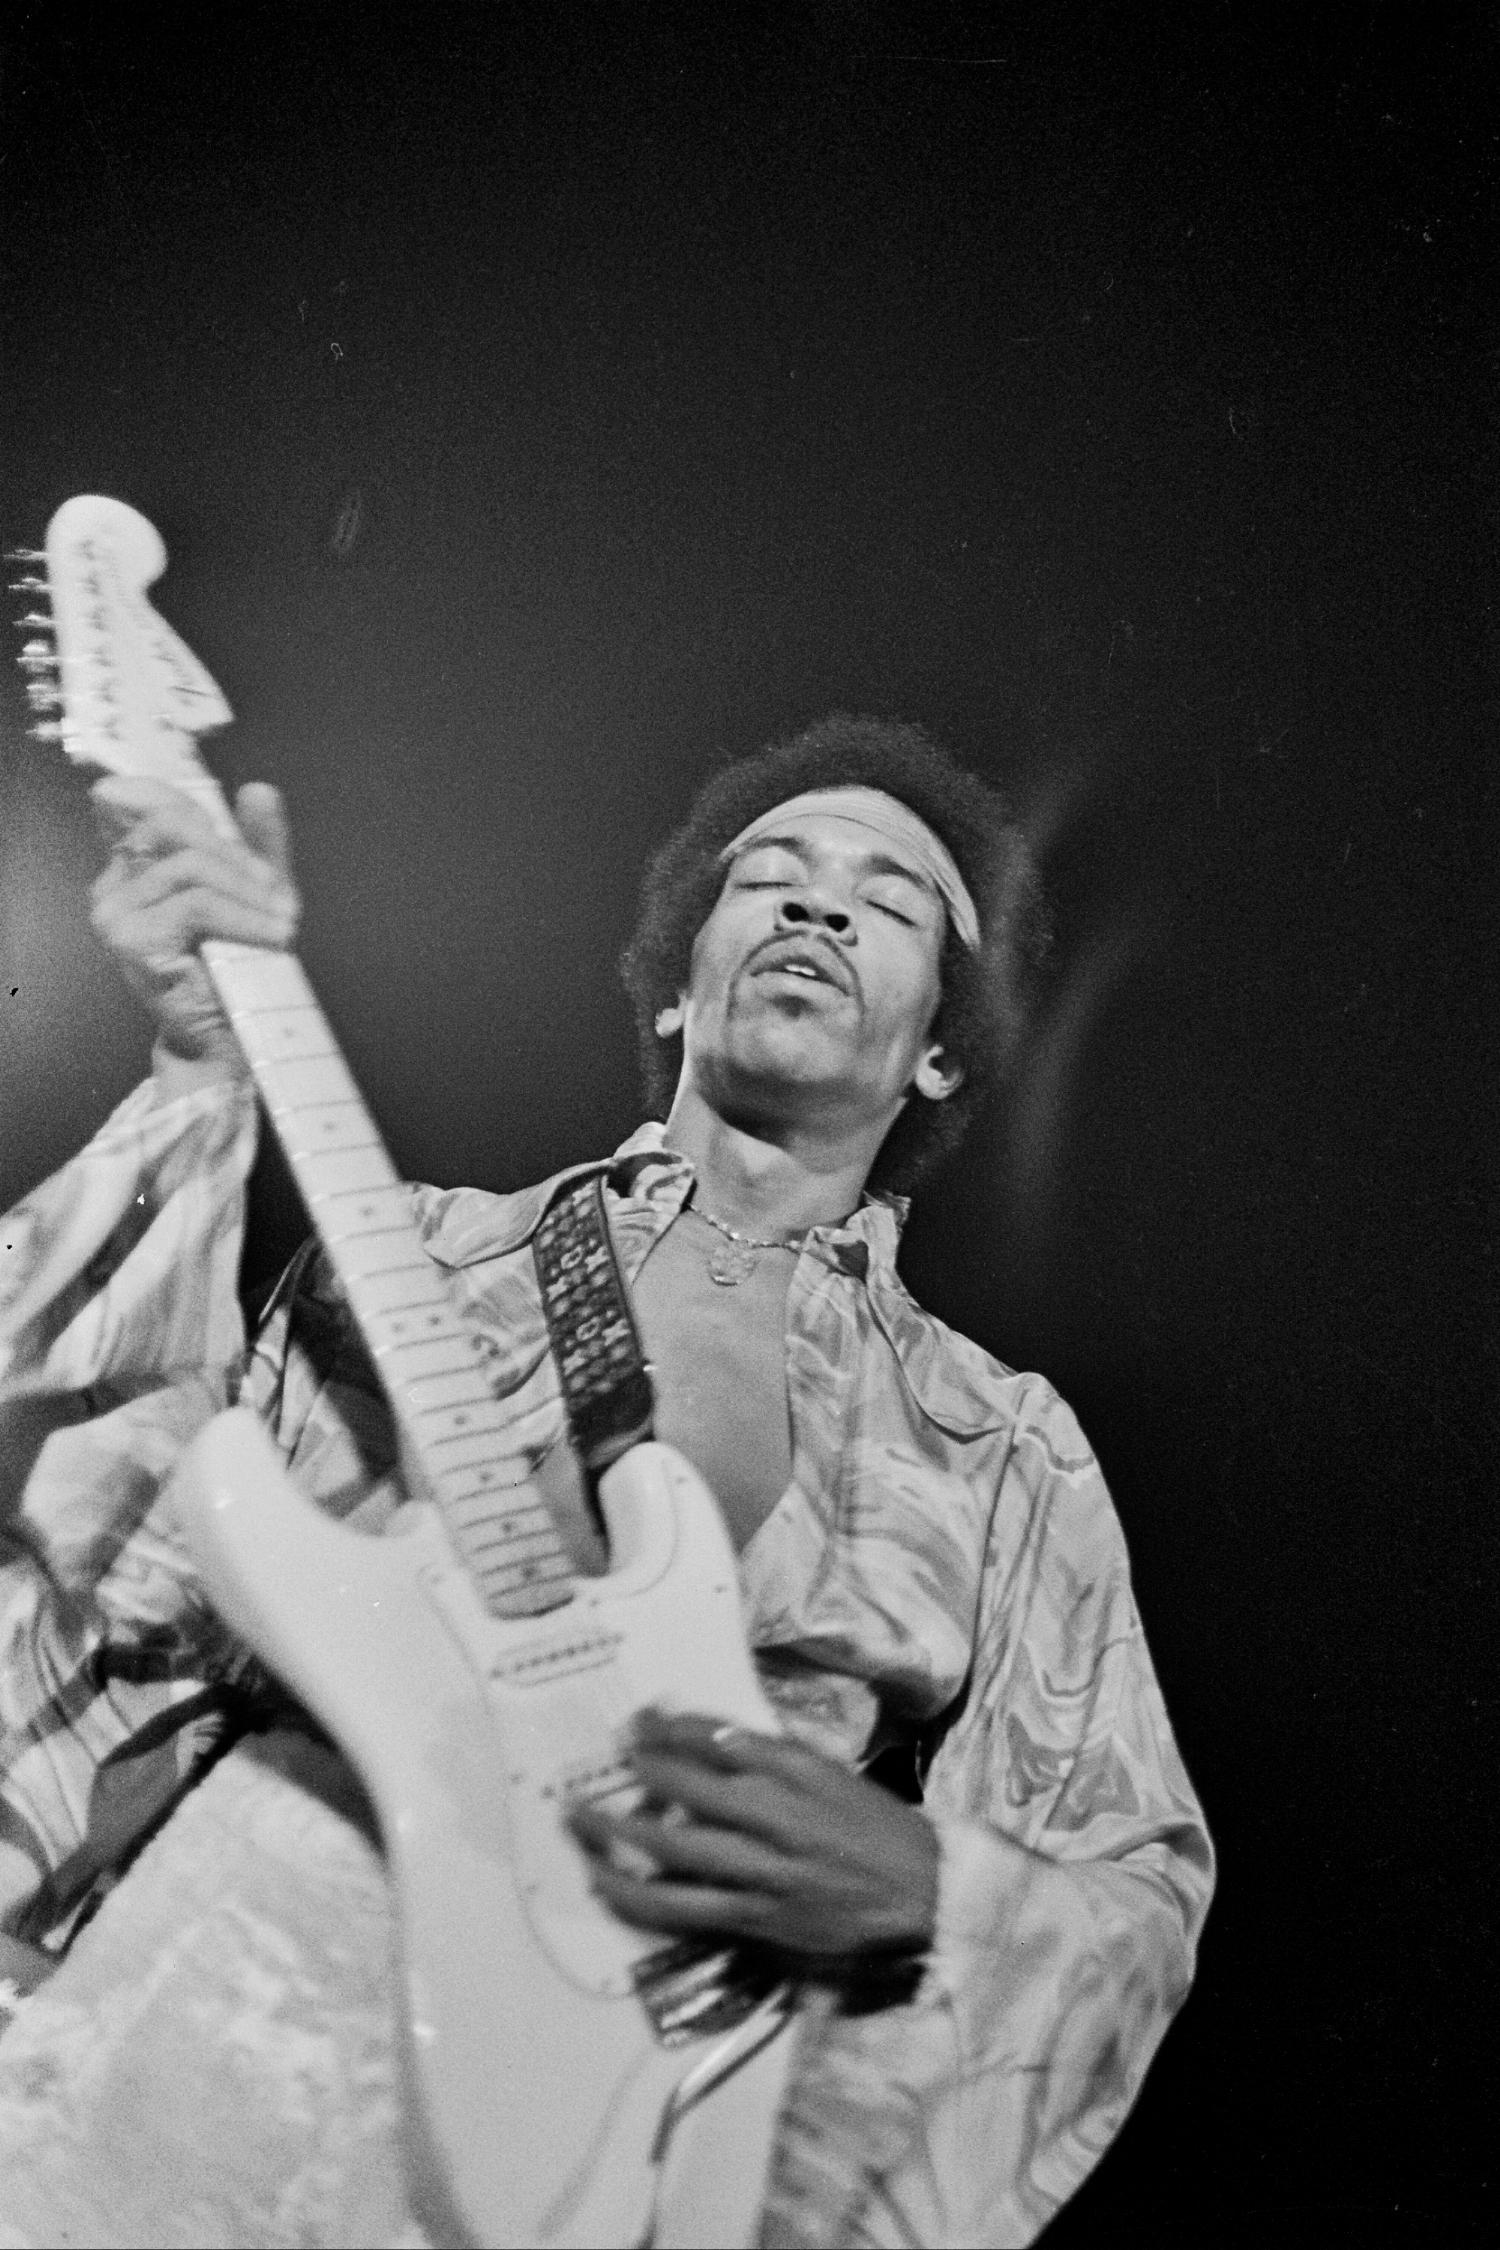 Grant Harper Reid Portrait Photograph - Jimi Hendrix Performing on Stage With Eyes Closed Fine Art Print